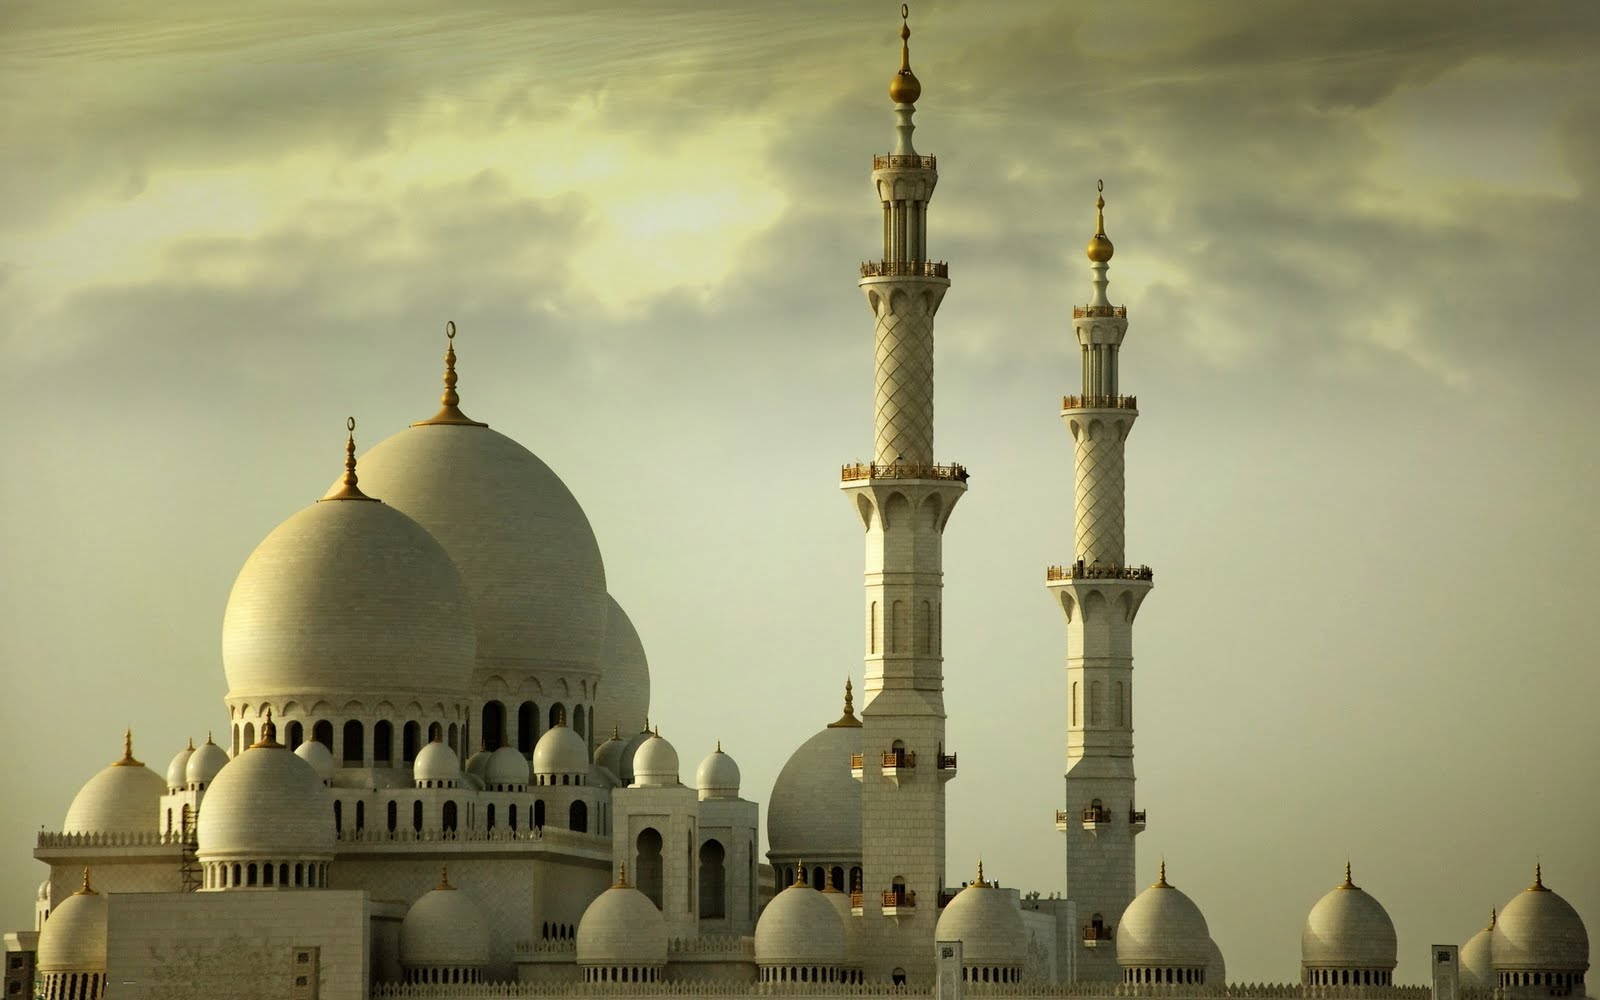 WallpapersKu Great Mosques Win 7 Themes 